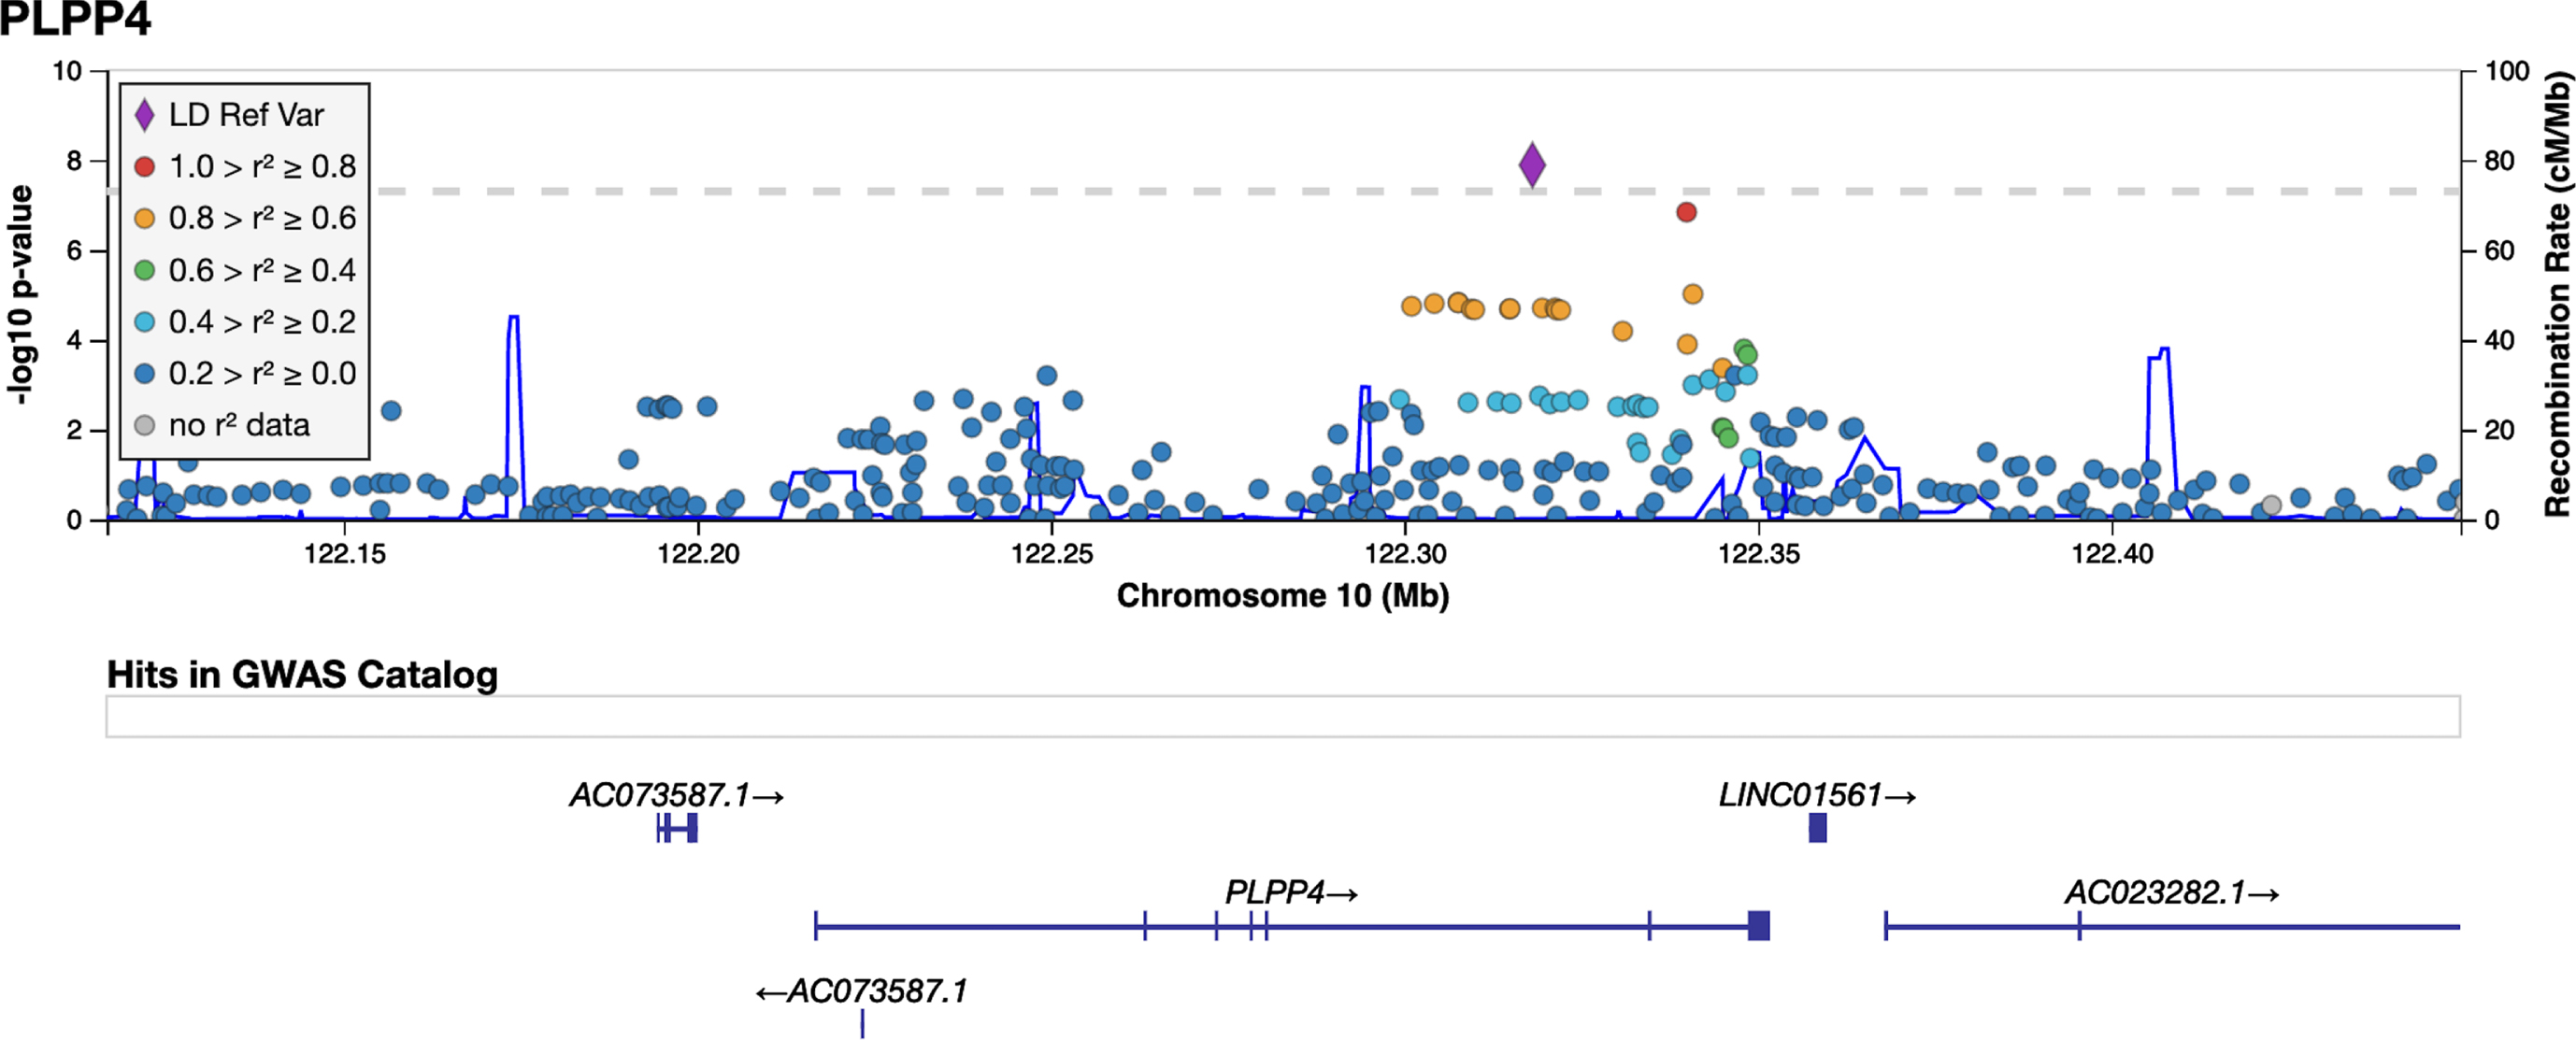 LocusZoom plot for PD GWAS PLPP4 locus. Imputed and genotyped variants passing QC in the PLPP4 gene +/- 100 kb (10 : 122116466-122449376) mapped to genome build GRCh37. The only coding gene in the region is PLPP4, other include pseudogenes (AC073587.1) and long non-coding RNA (LINC01561, AC023282.1, WDR11-AS1). The variant with lowest p-value (index) is indicated as a purple diamond. Marker colors indicate the strength of LD as r2 between the index variant and other variants in the 1000 Genomes EUR population.